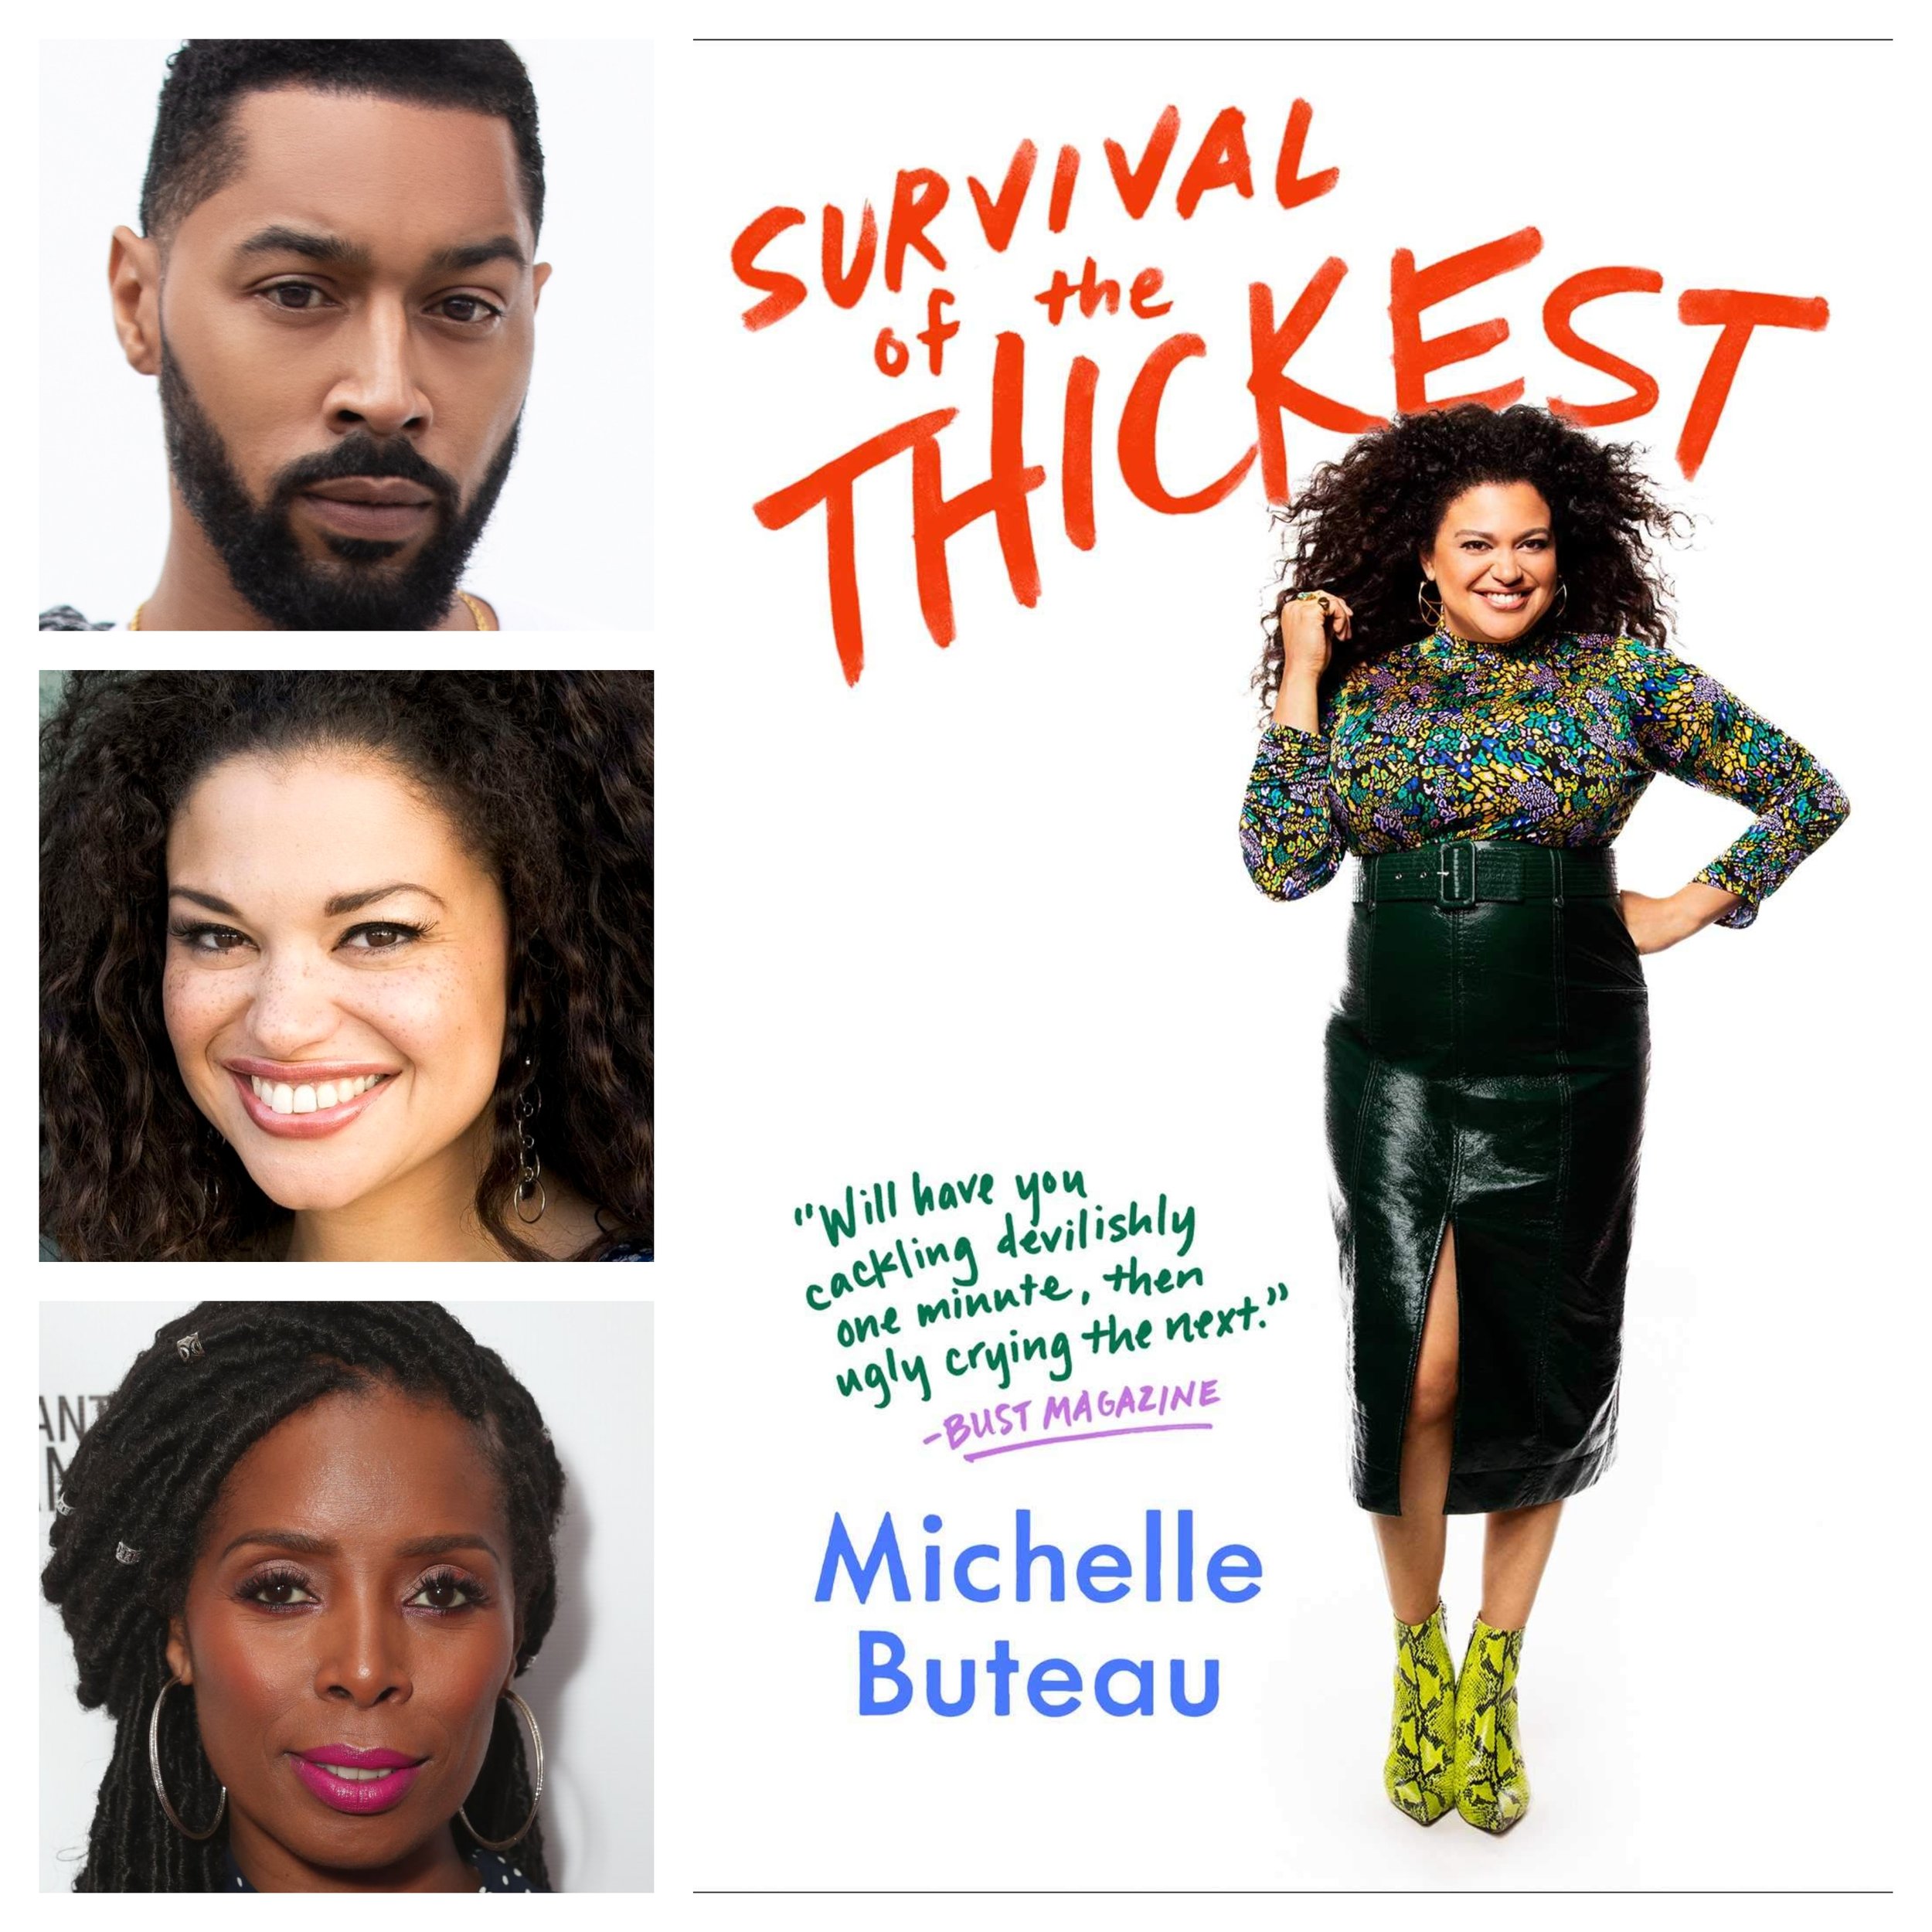 Survival of the Thickest: Survival of the Thickest on Netflix